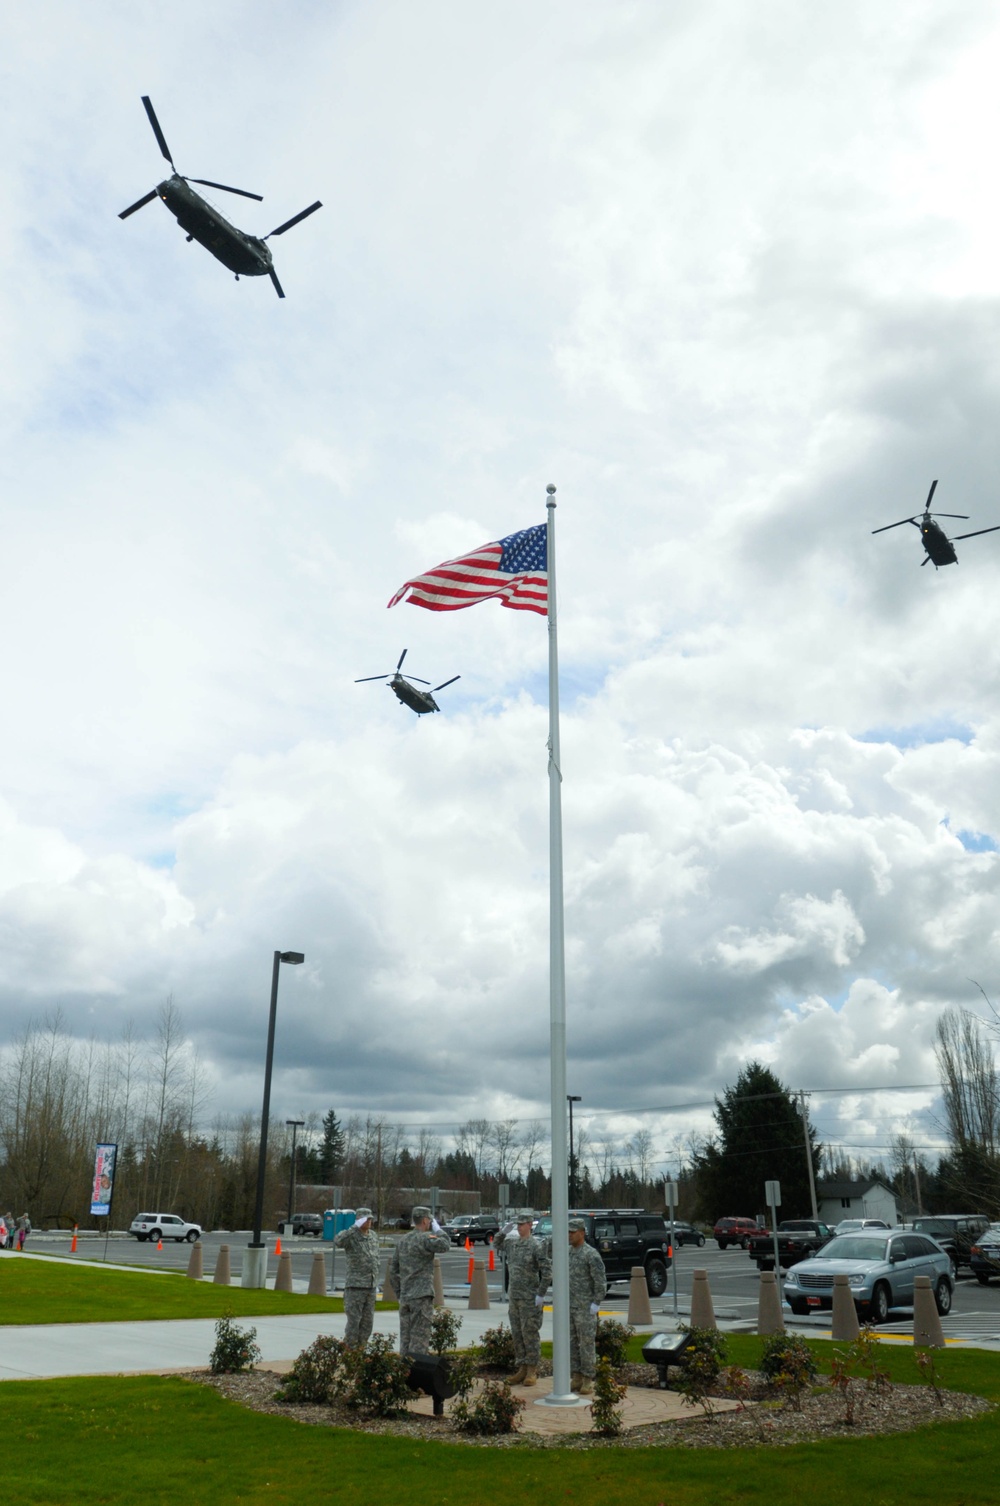 Marysville Armed Forces Reserve Center commissioning and ribbon cutting ceremony